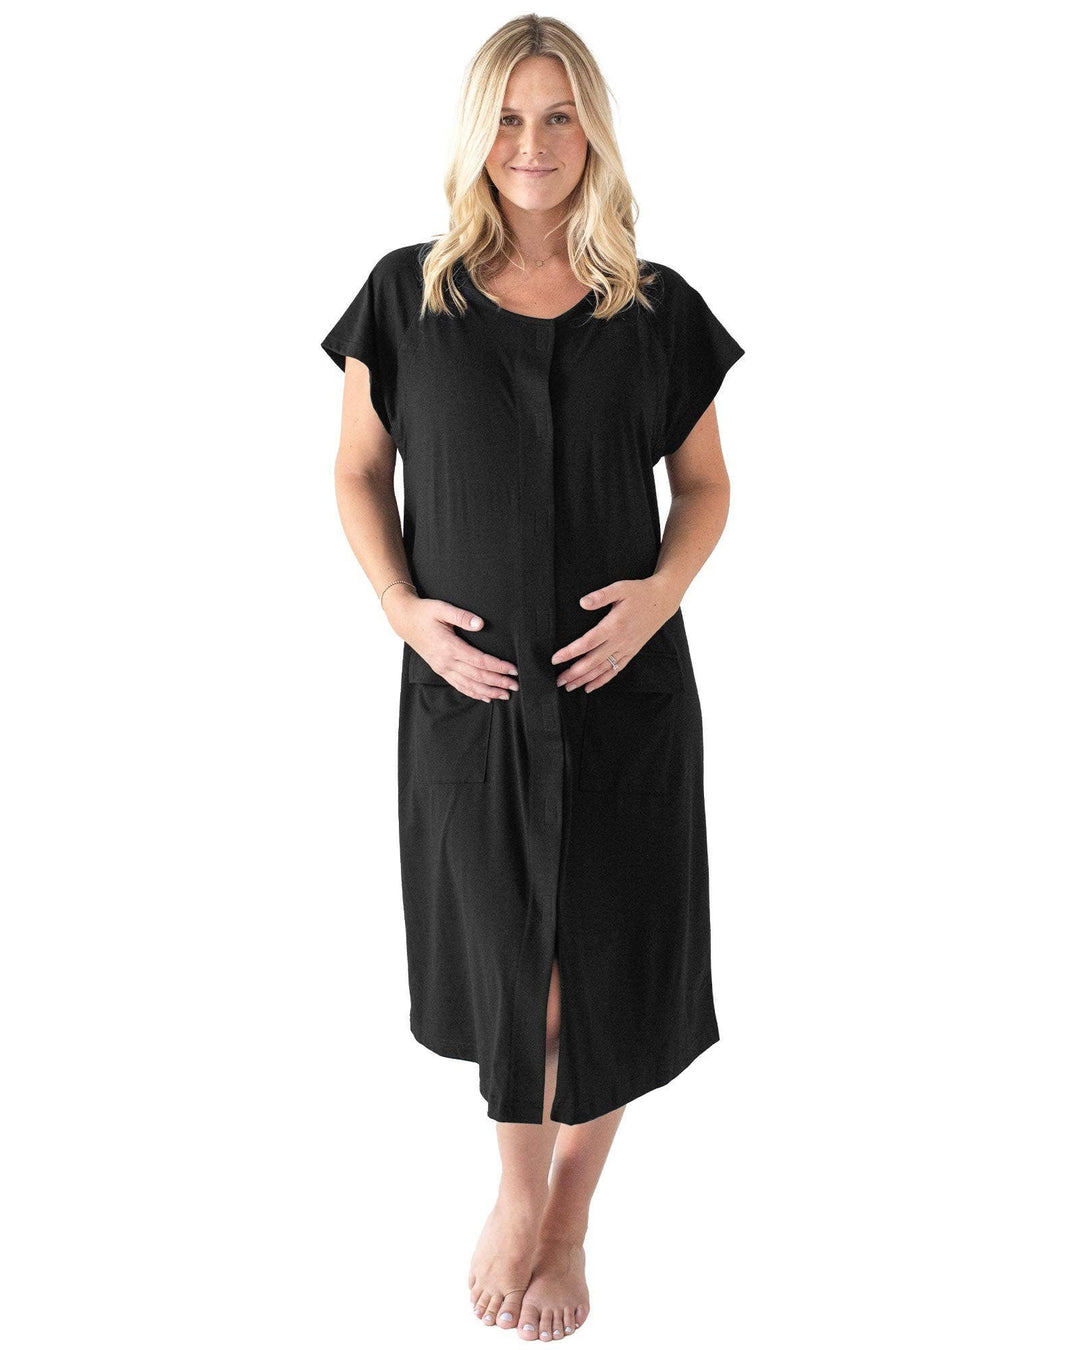 Kindred Bravely 3 In 1 Universal Labor, Delivery & Nursing Gown